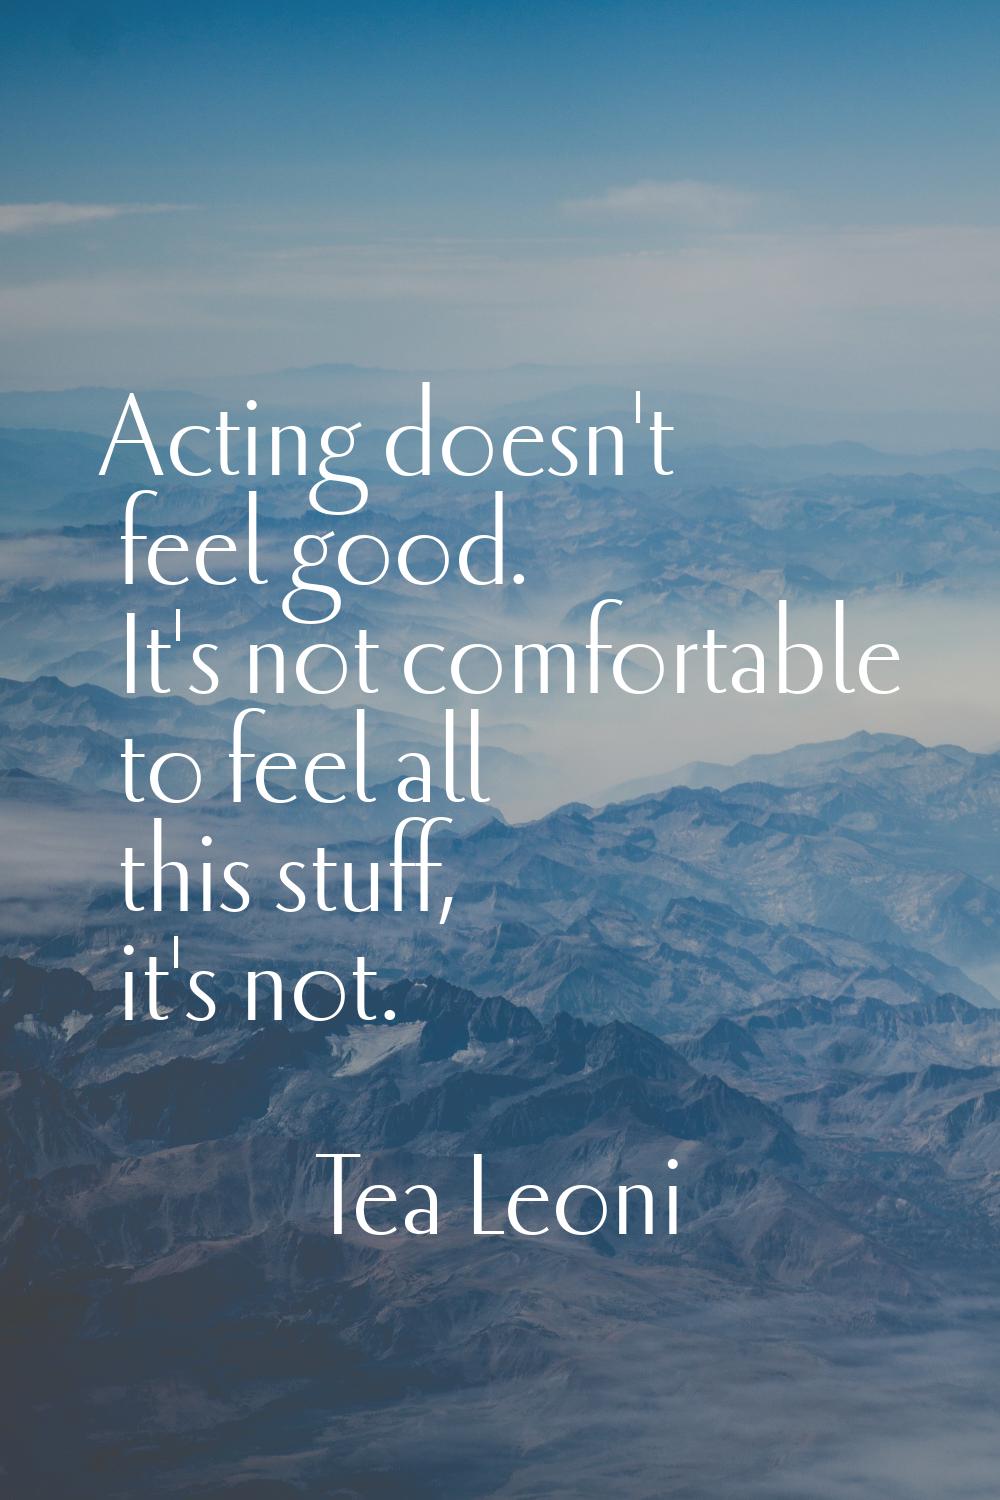 Acting doesn't feel good. It's not comfortable to feel all this stuff, it's not.